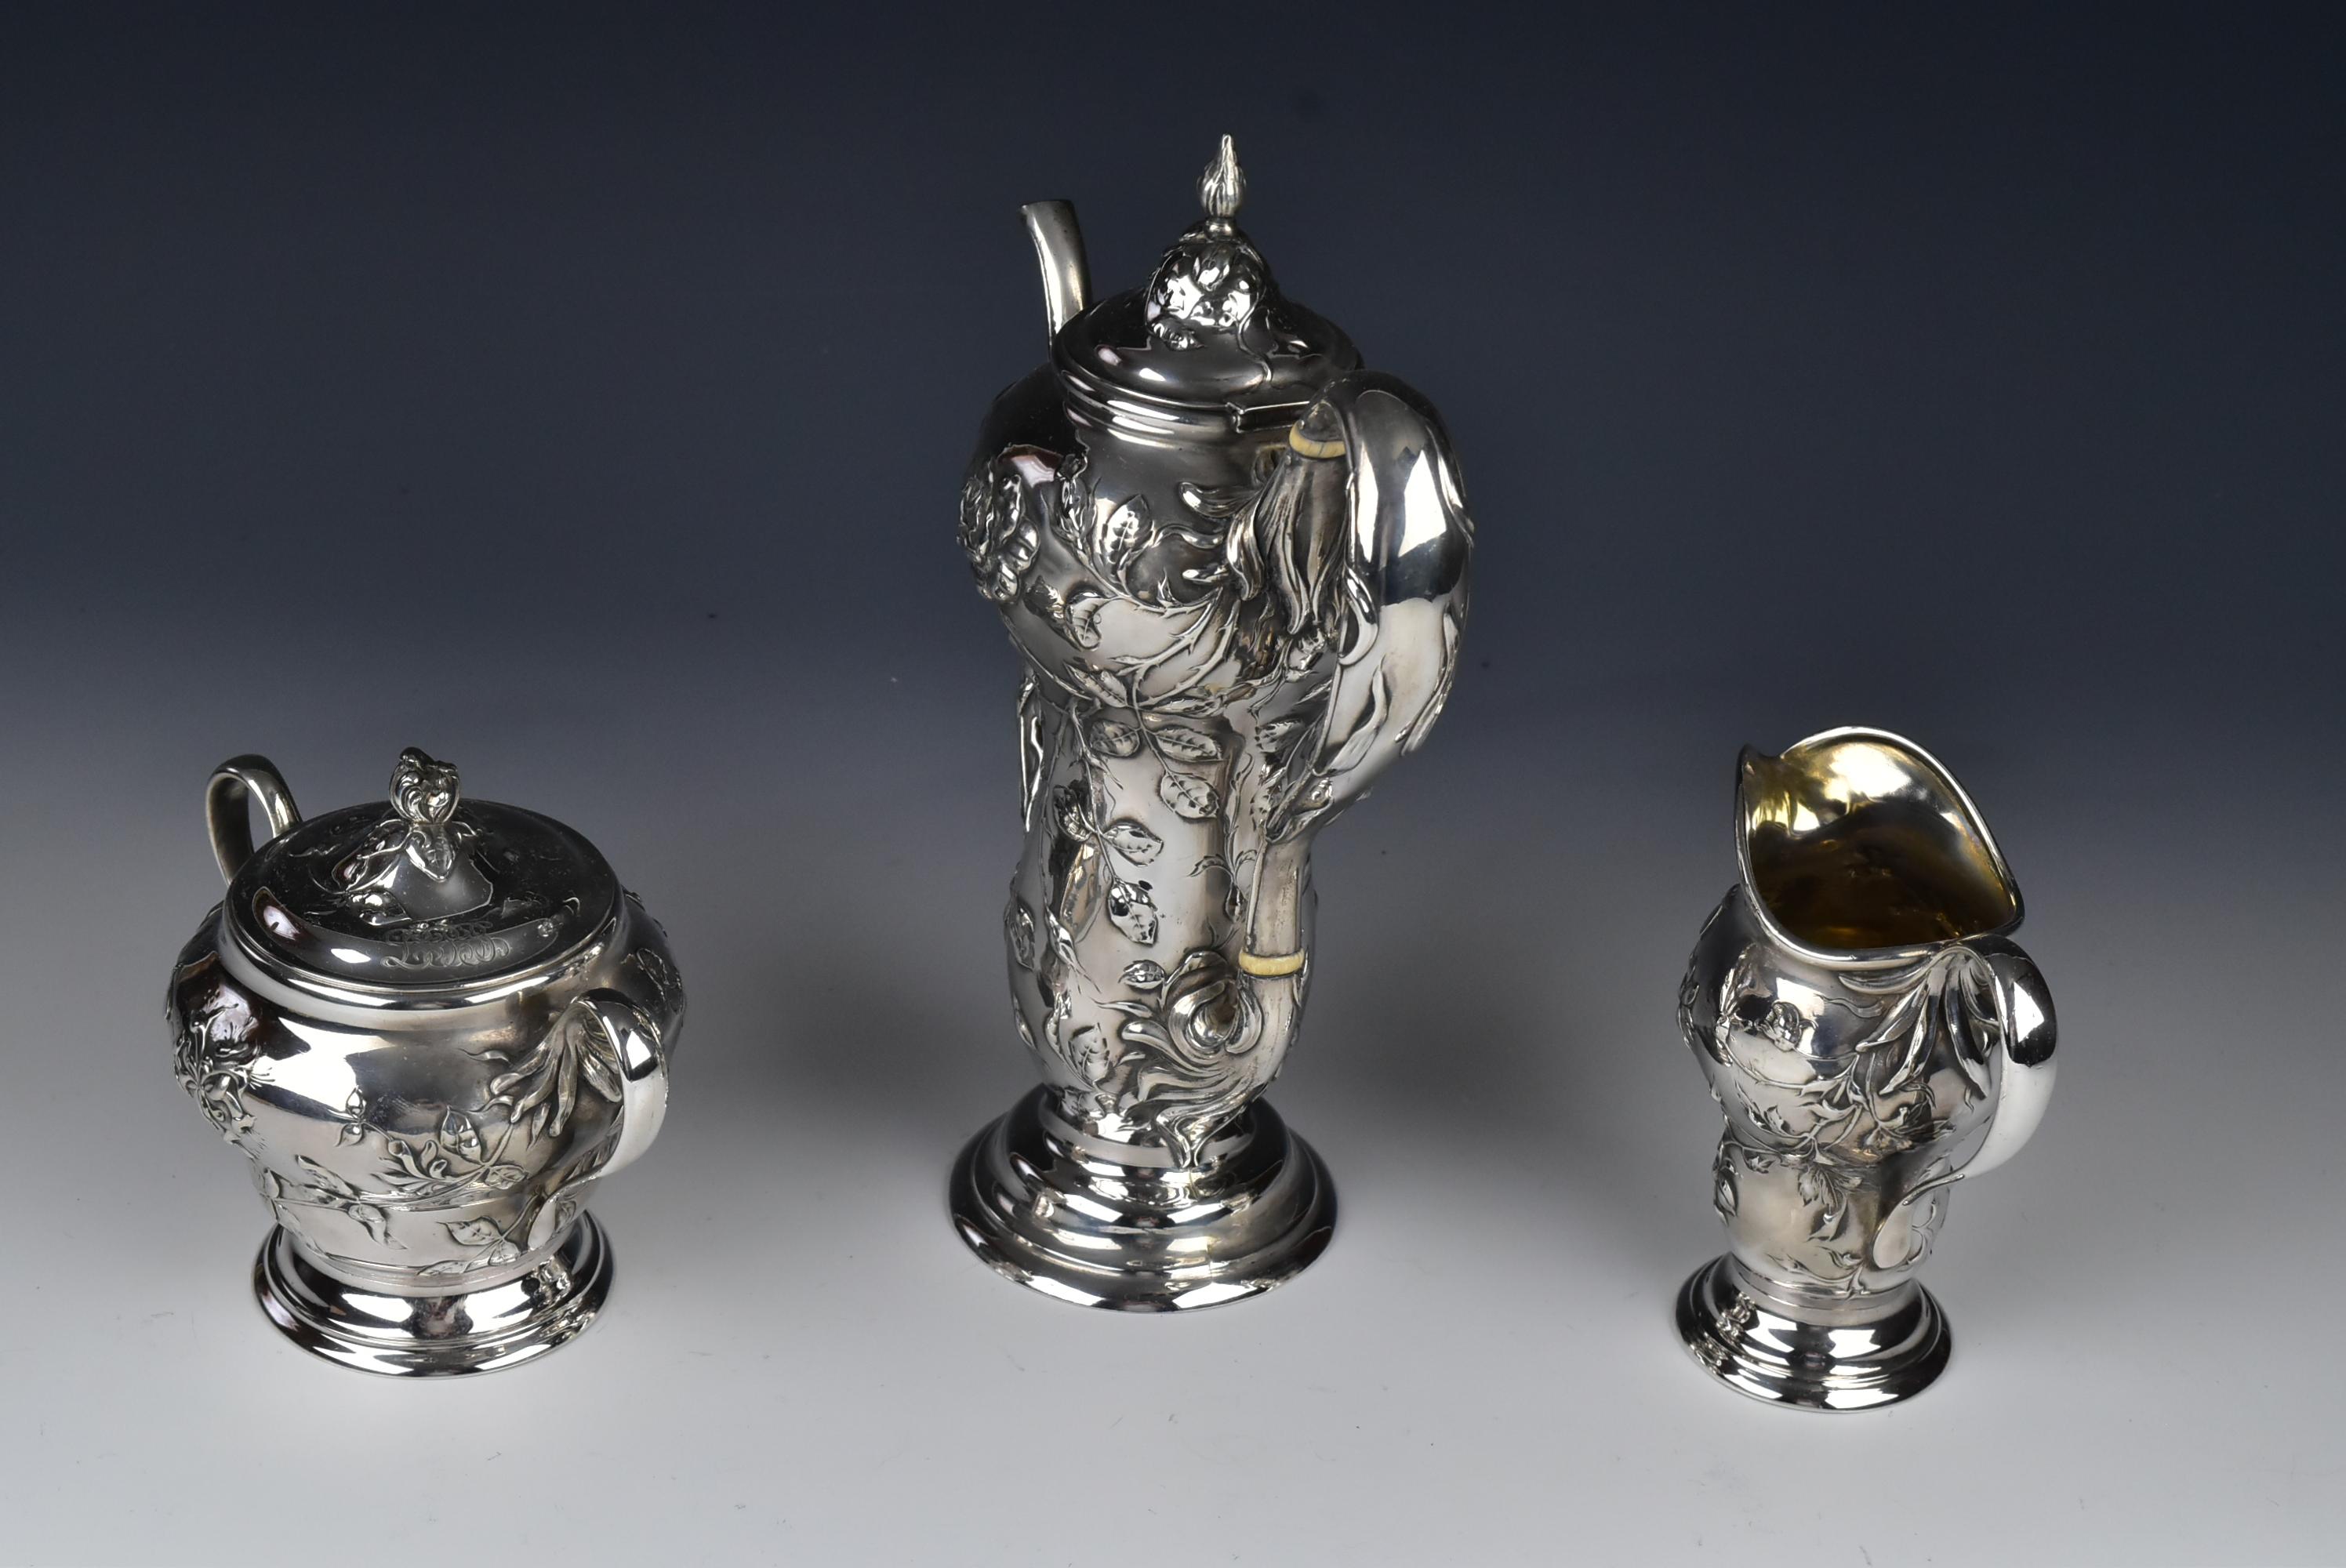 20th Century Marcus & Co. of New York Four-Piece Sterling Silver Cocoa or Hot Chocolate Set